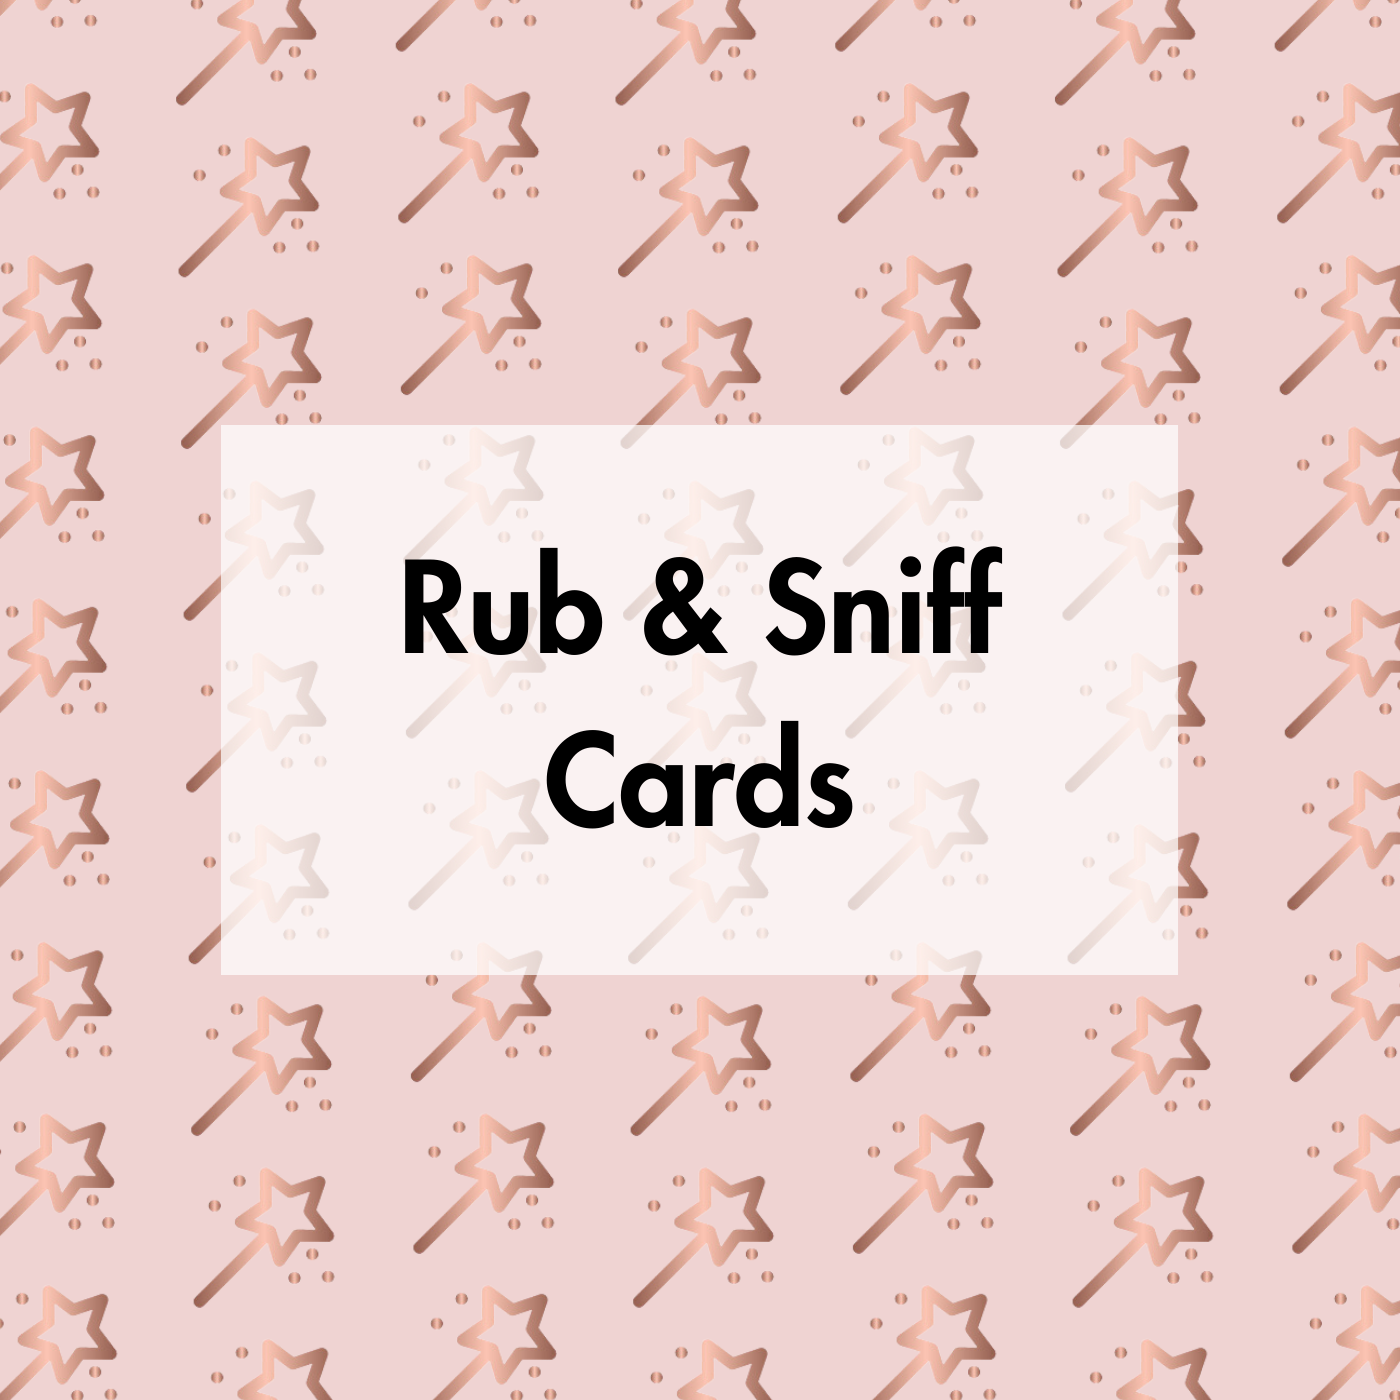 RUB & SNIFF CARDS